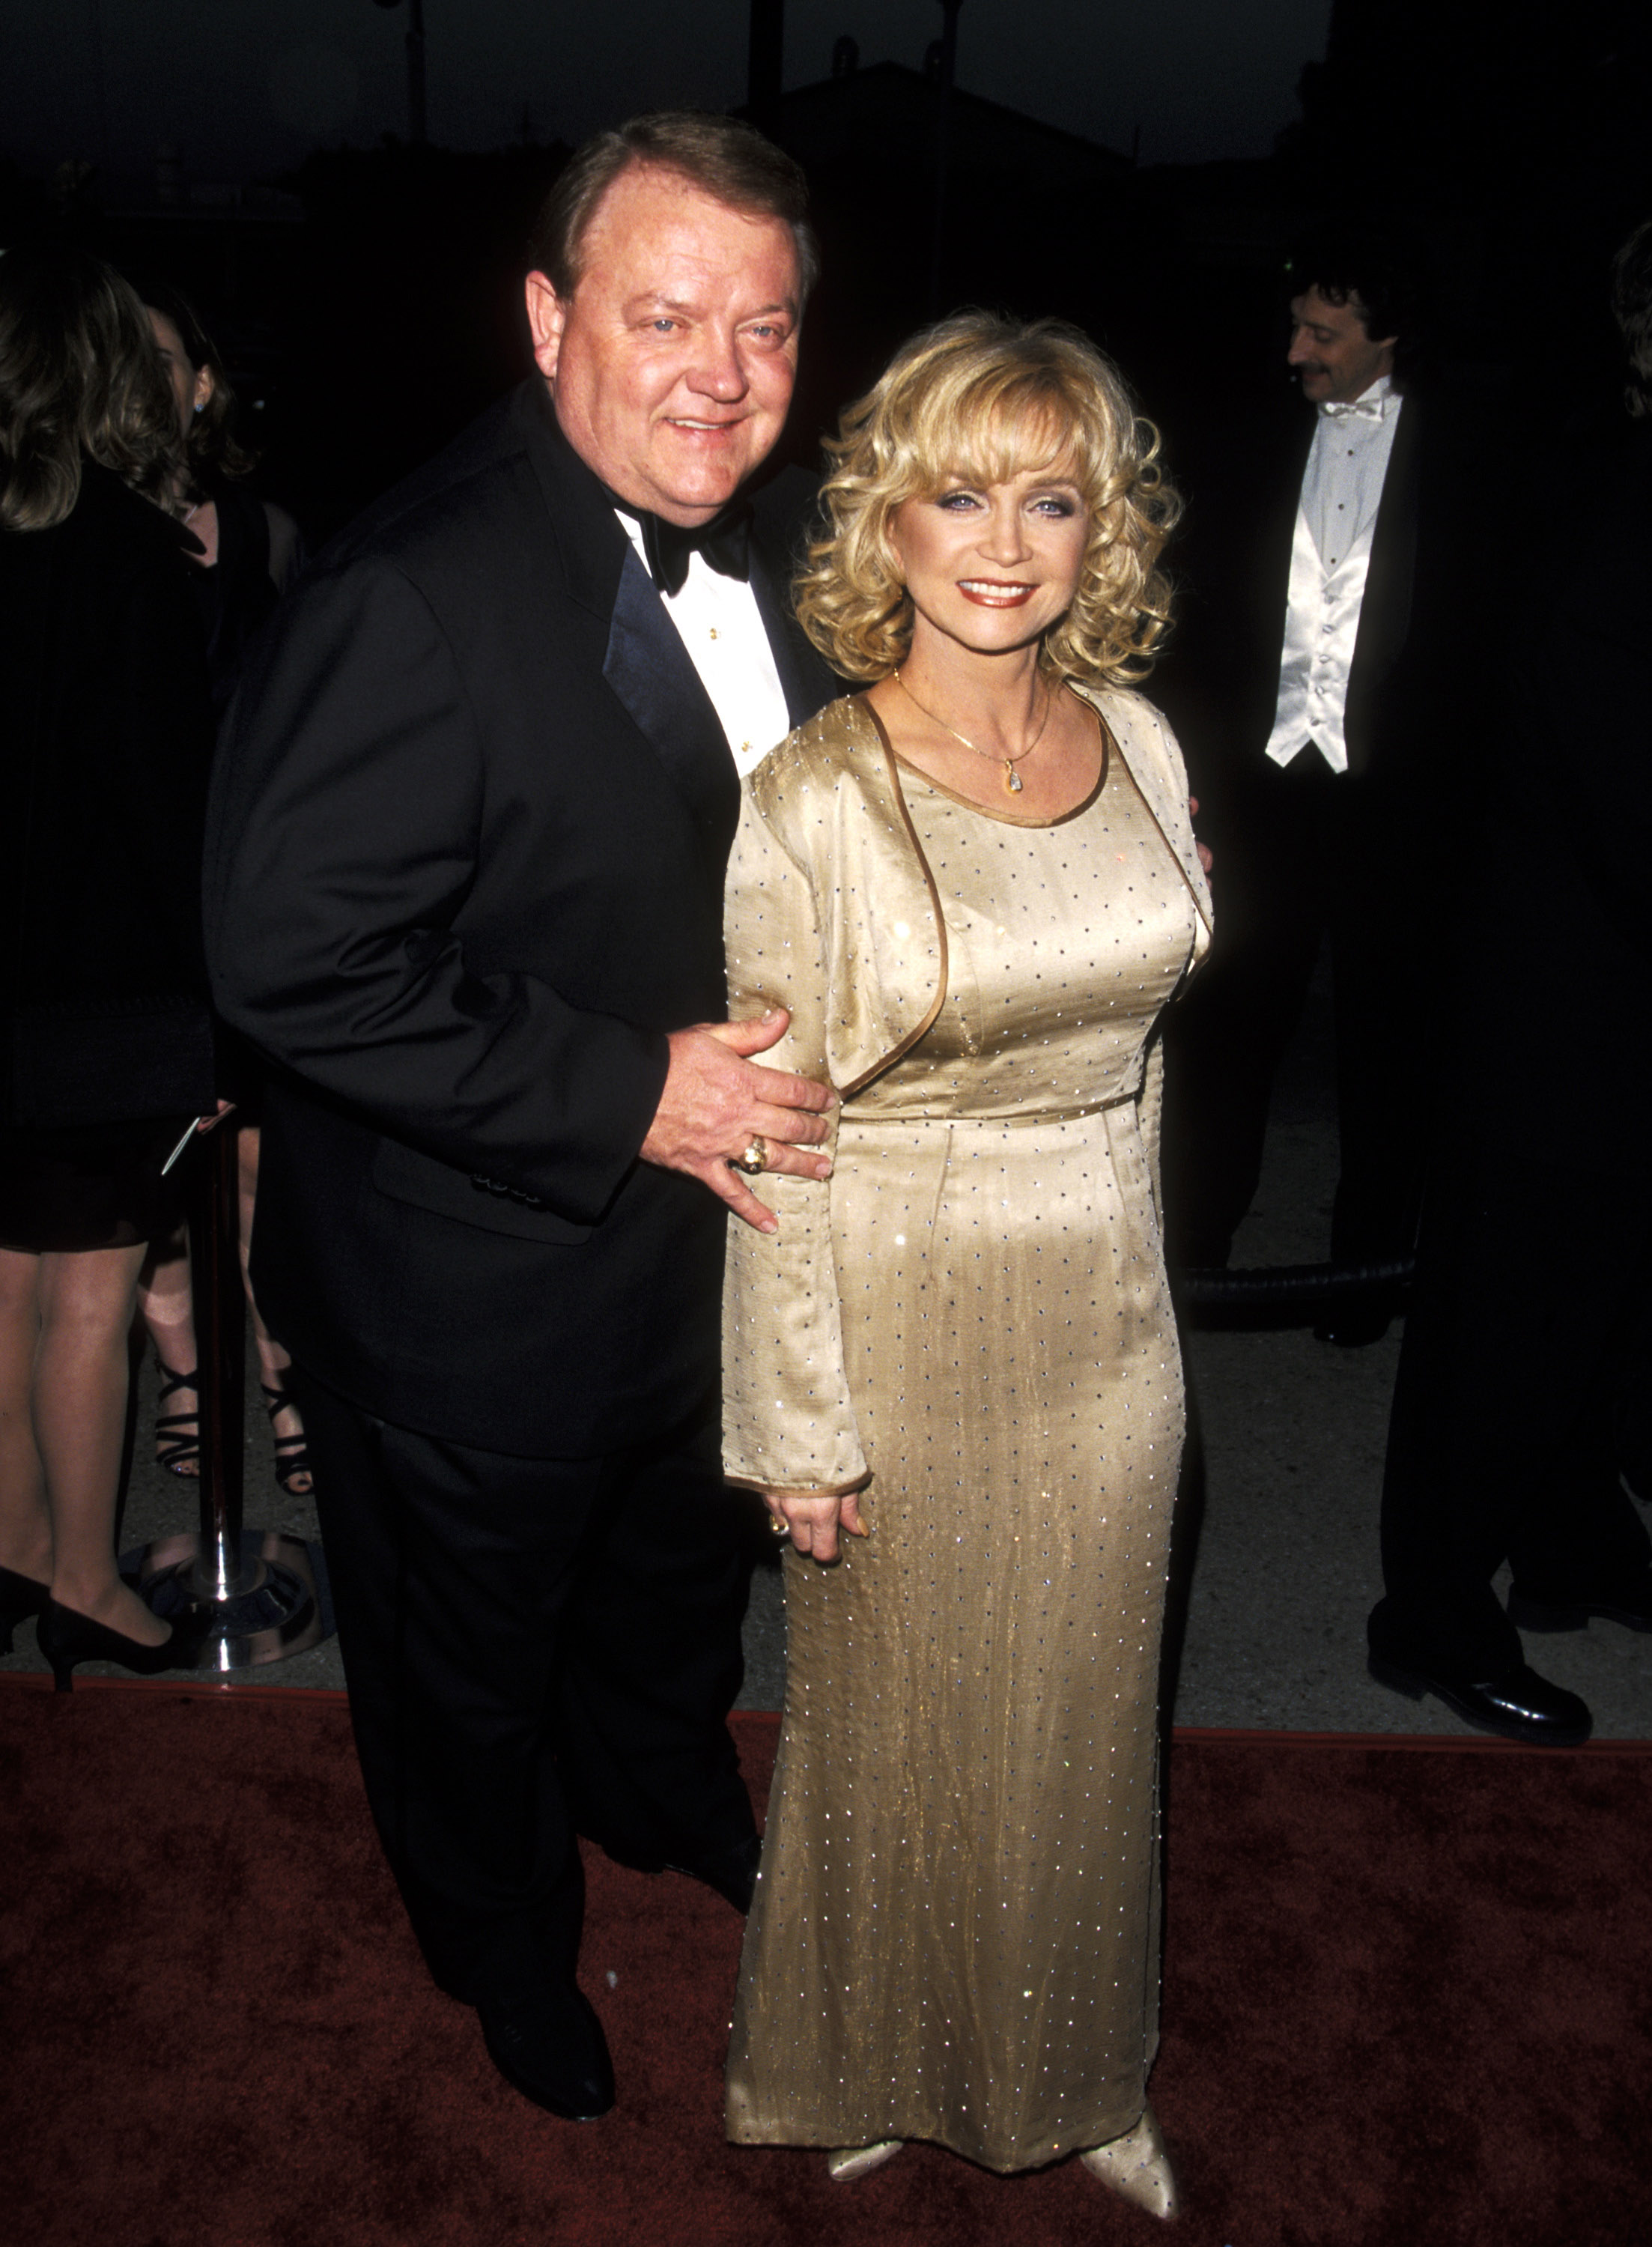 Barbara Mandrell and Ken Dudney during 15th Annual Soap Opera Digest Awards in Universal City, California, on February 26, 1999. | Source: Getty Images